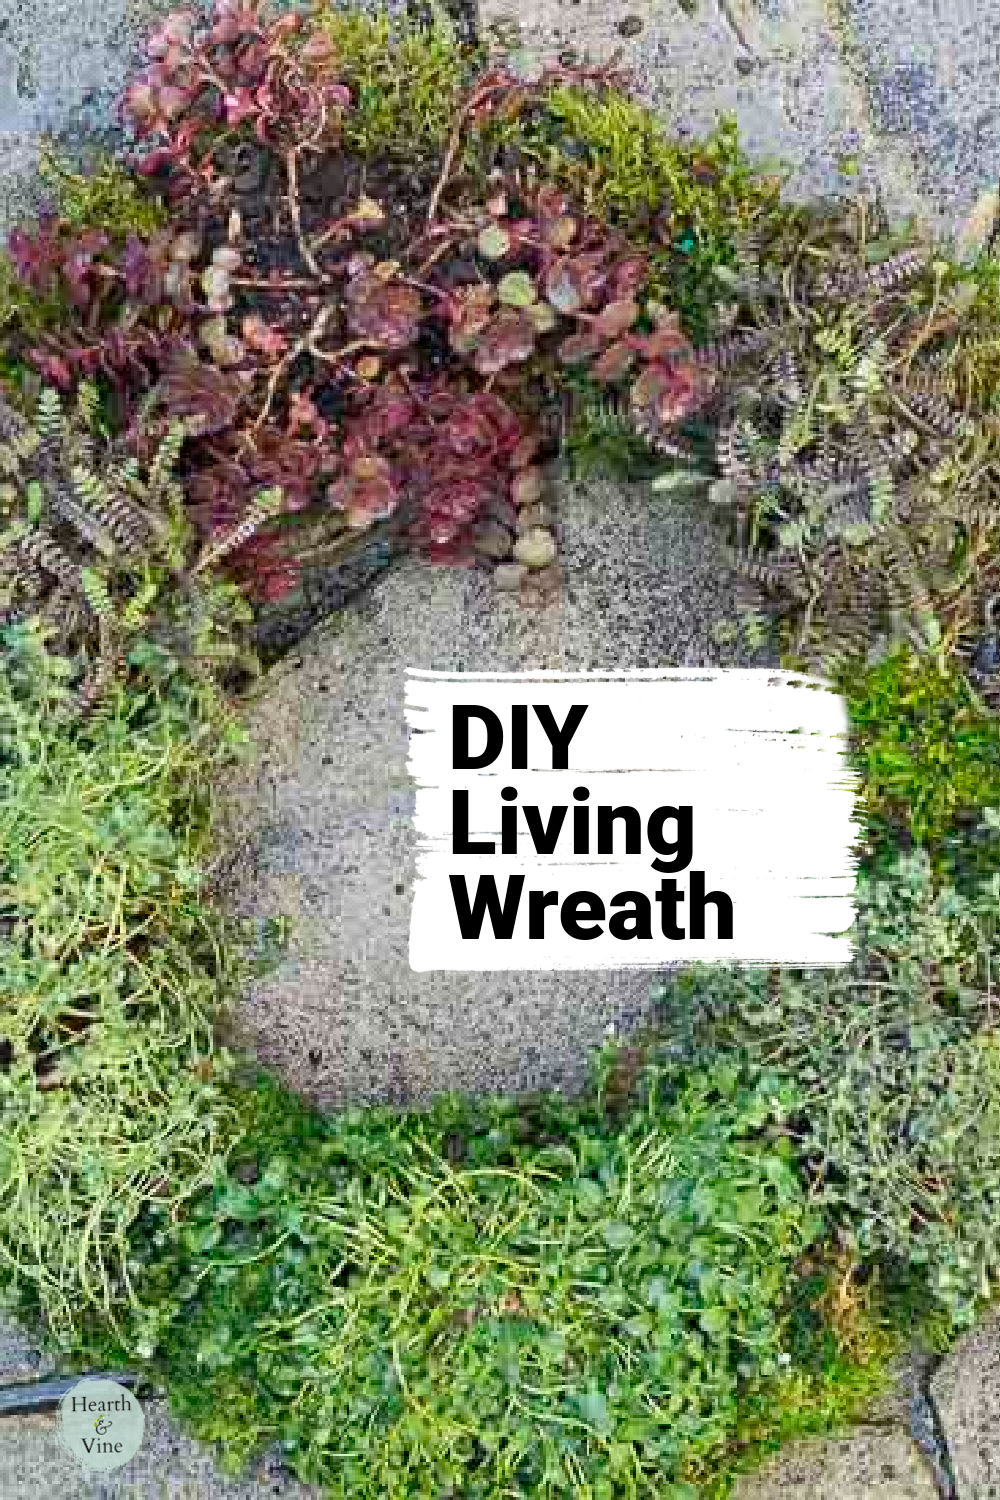 Living wreath with herbs and ground cover lying on the cement floor.